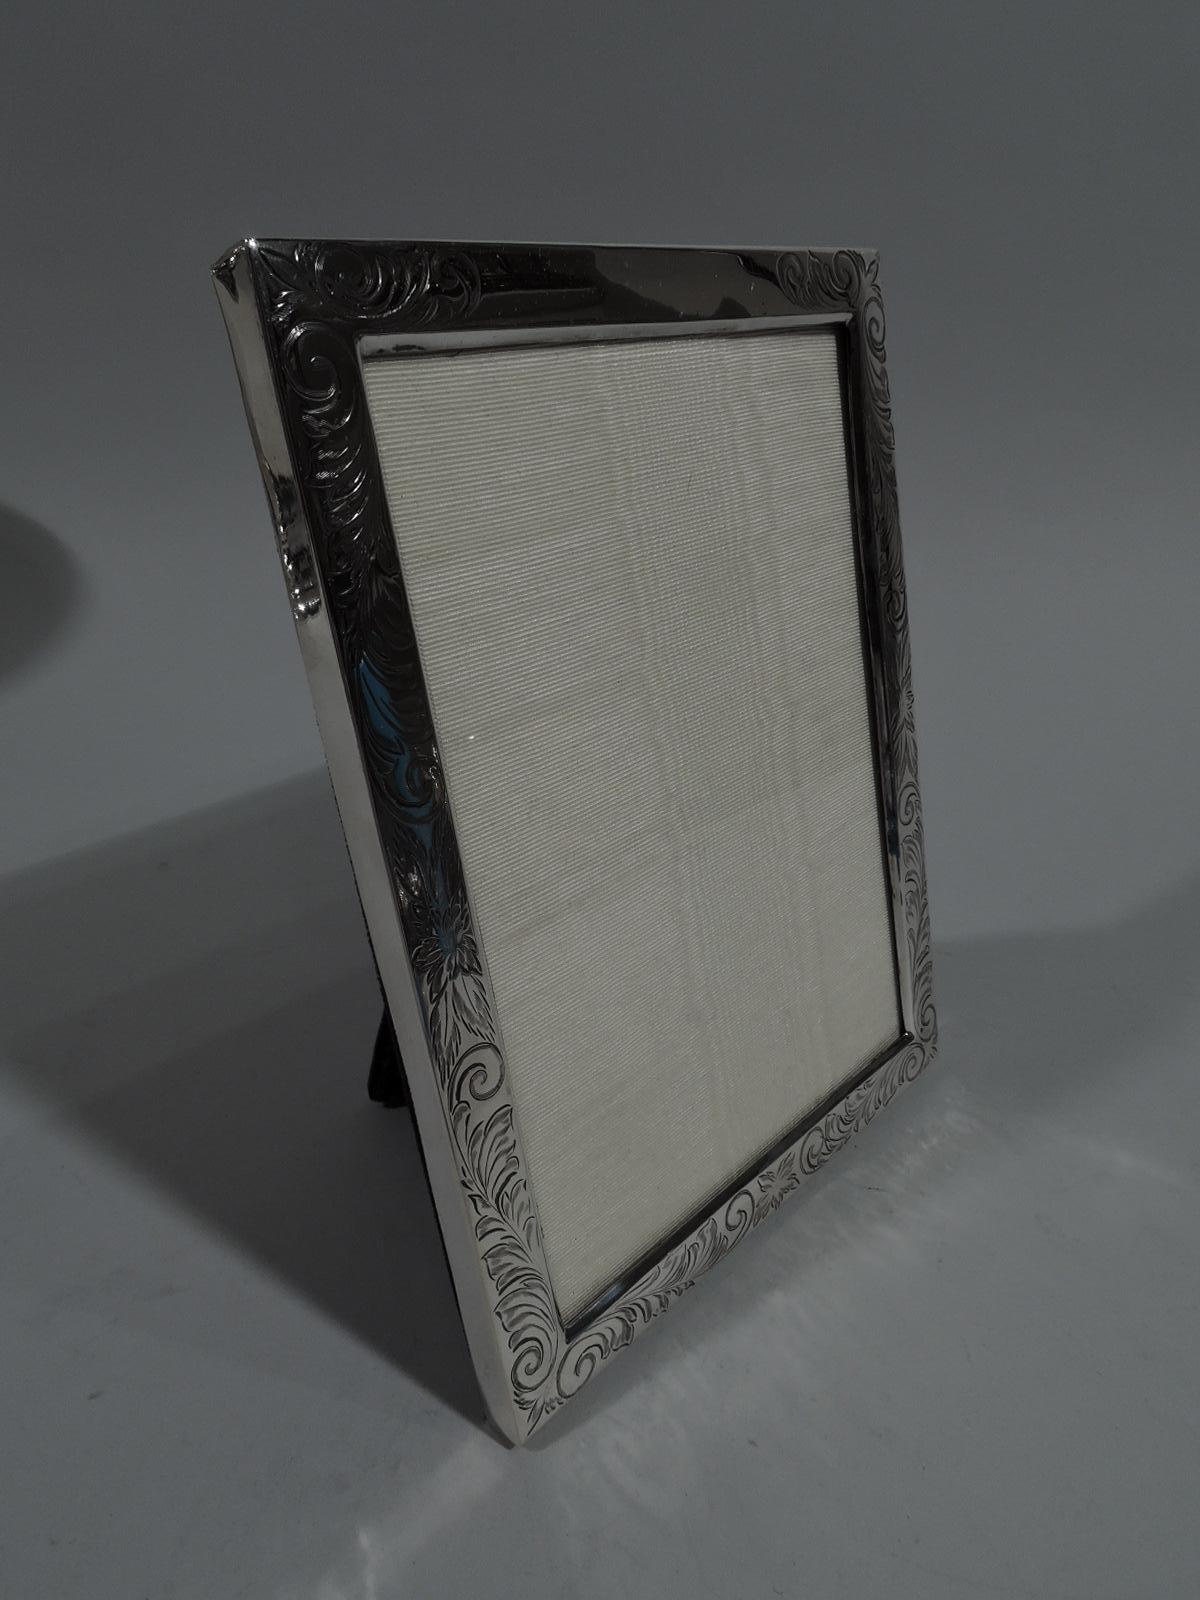 Lovely Art Nouveau sterling silver picture frame. Rectangular window and flat surround engraved with delicate and fluid scrolls and flowers. Center top rail vacant. With glass, silk lining and velvet back and hinged support. Fully marked including